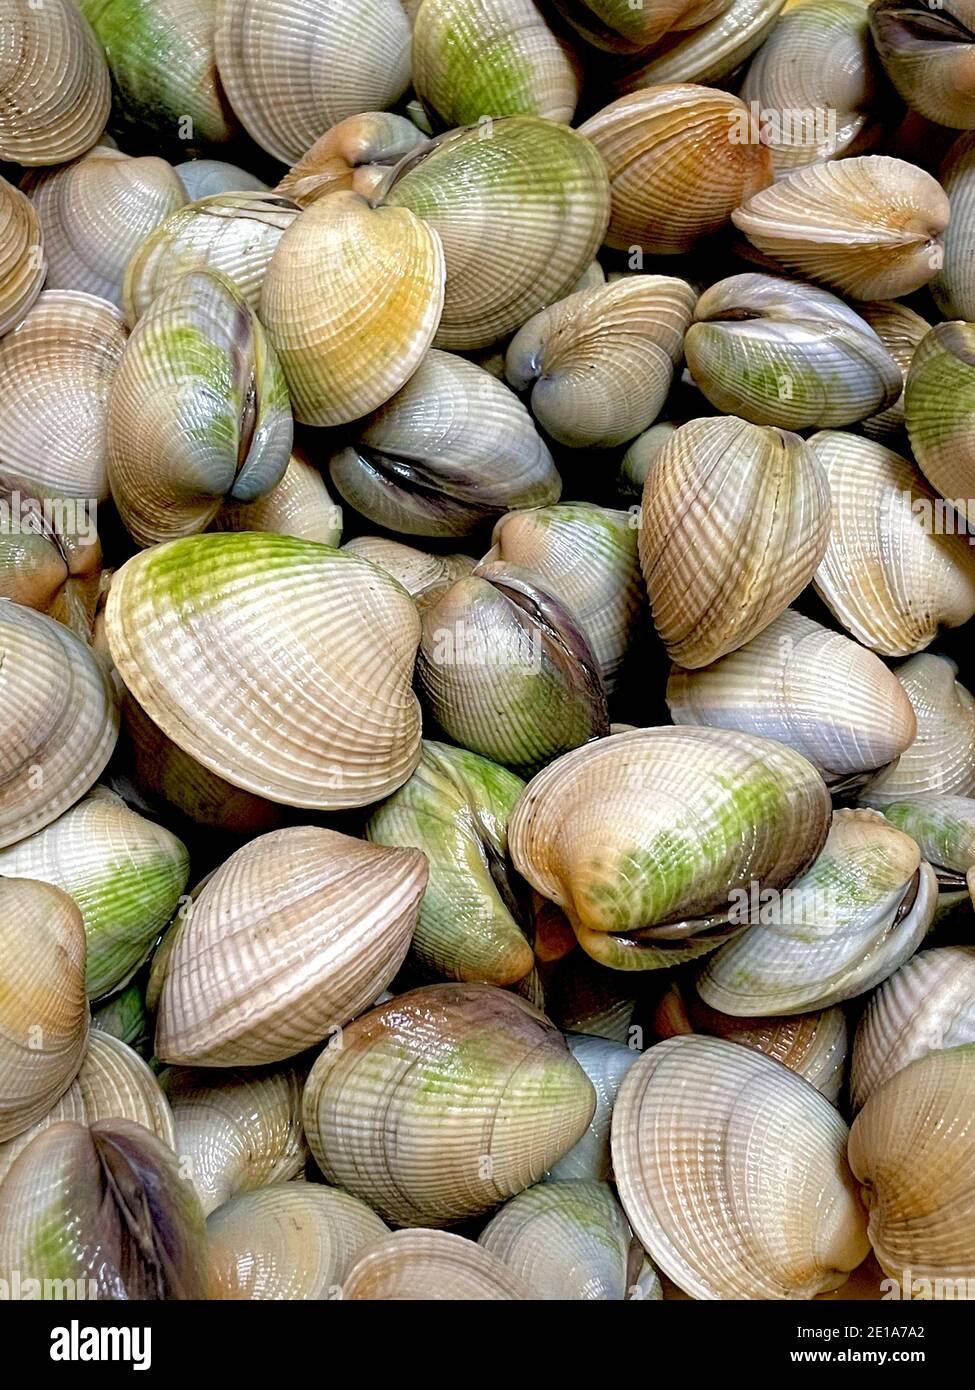 Manila Clams, or Cockles, washed and cleaned ready for cooking.  Close-up color photograph. Stock Photo